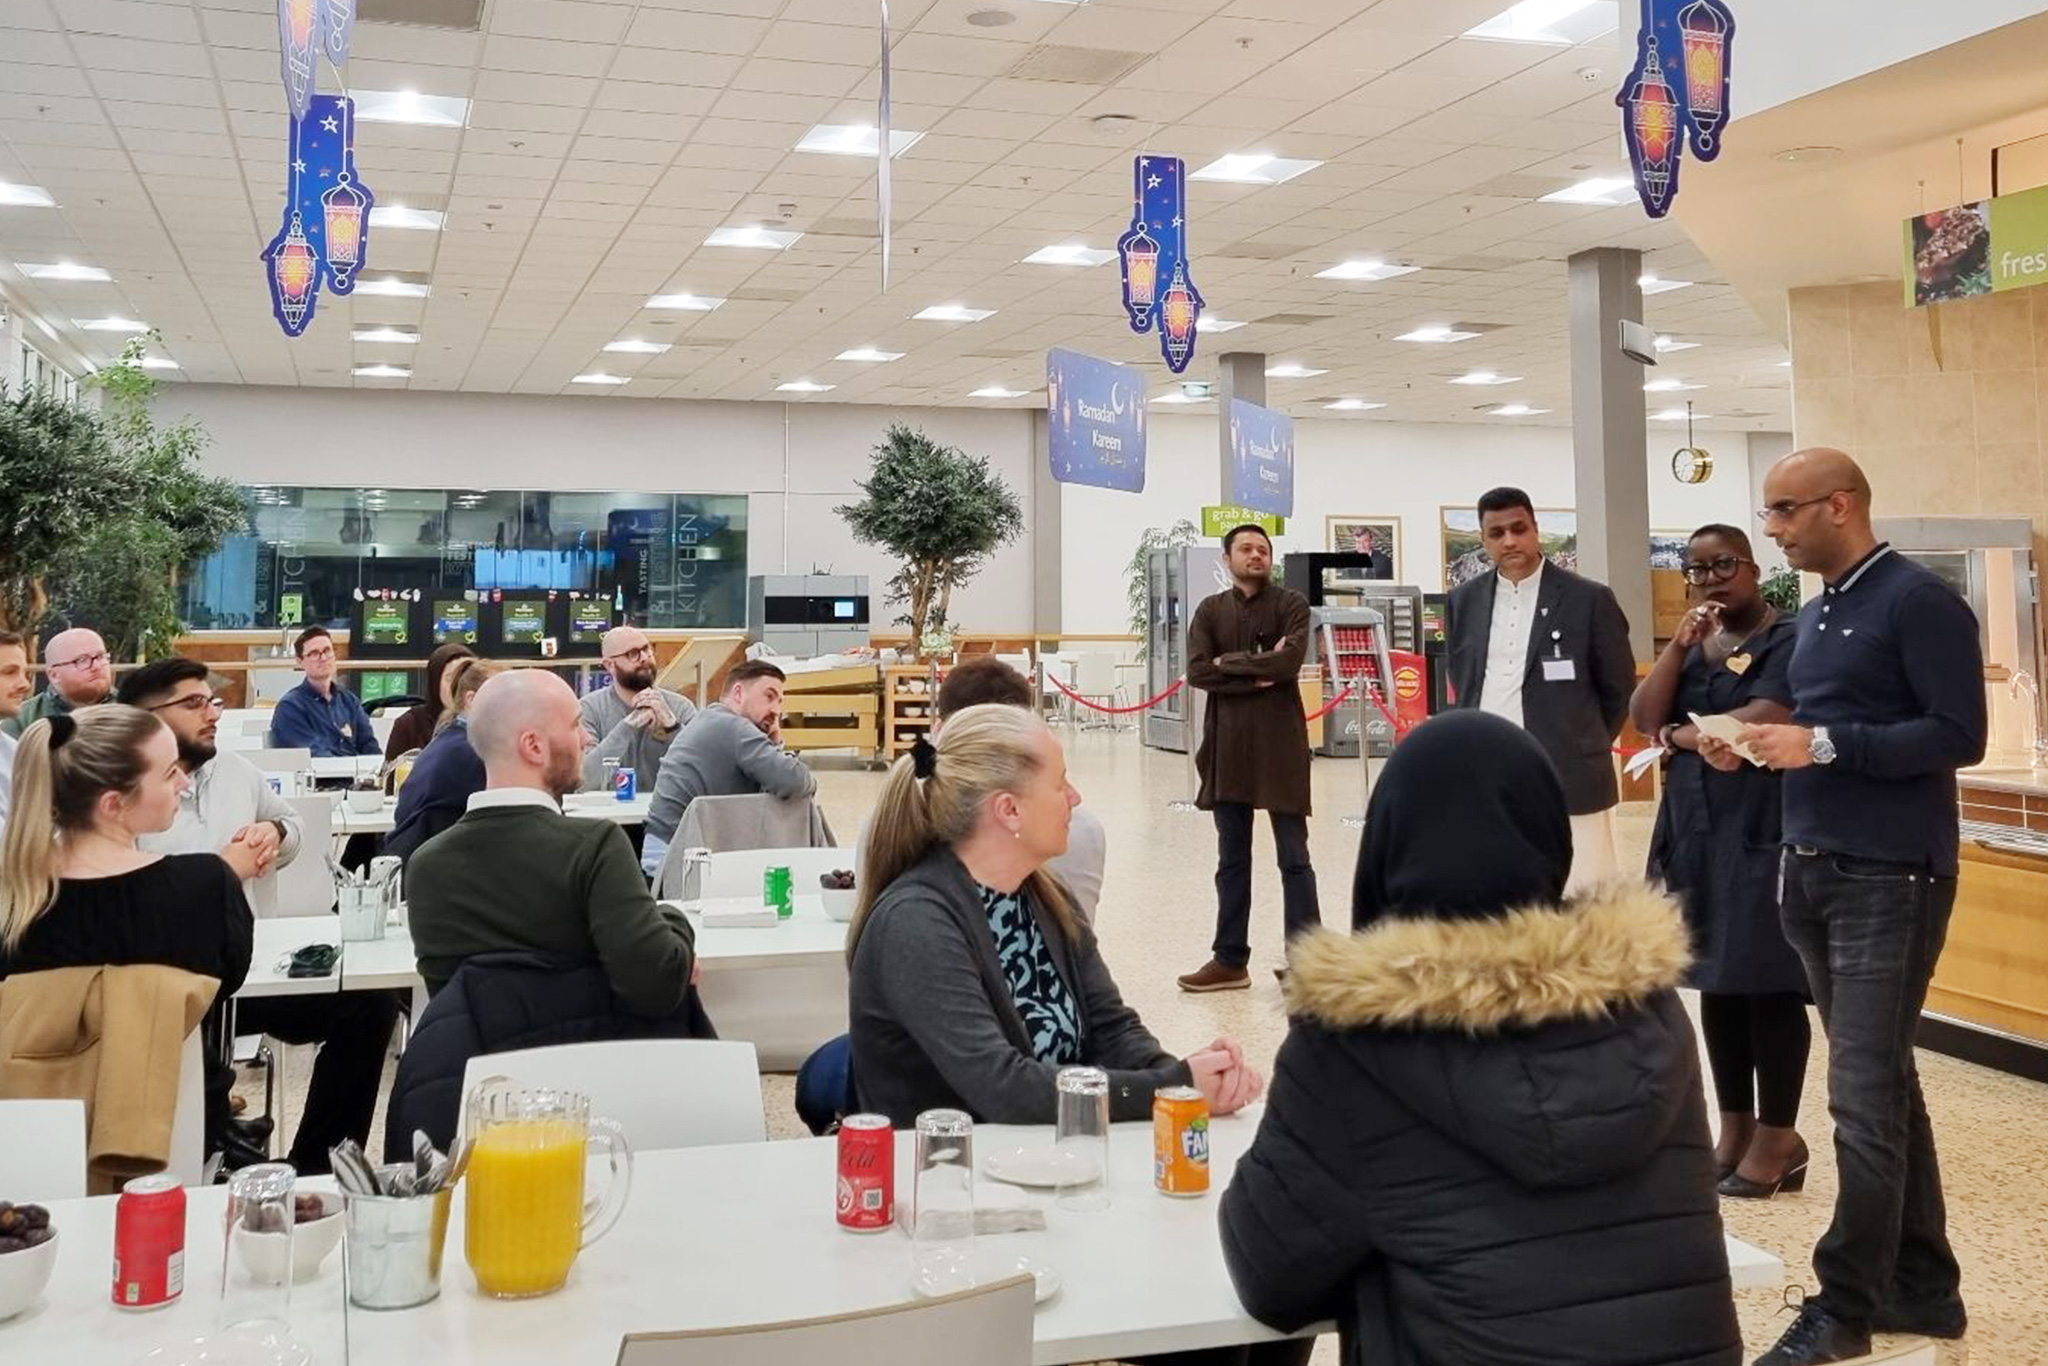 Our CEO Younis Chaudhry was invited to Morrisons head office in Bradford for a special Iftar event, where he spoke about his own journey of faith and his experiences as a practising Muslim.